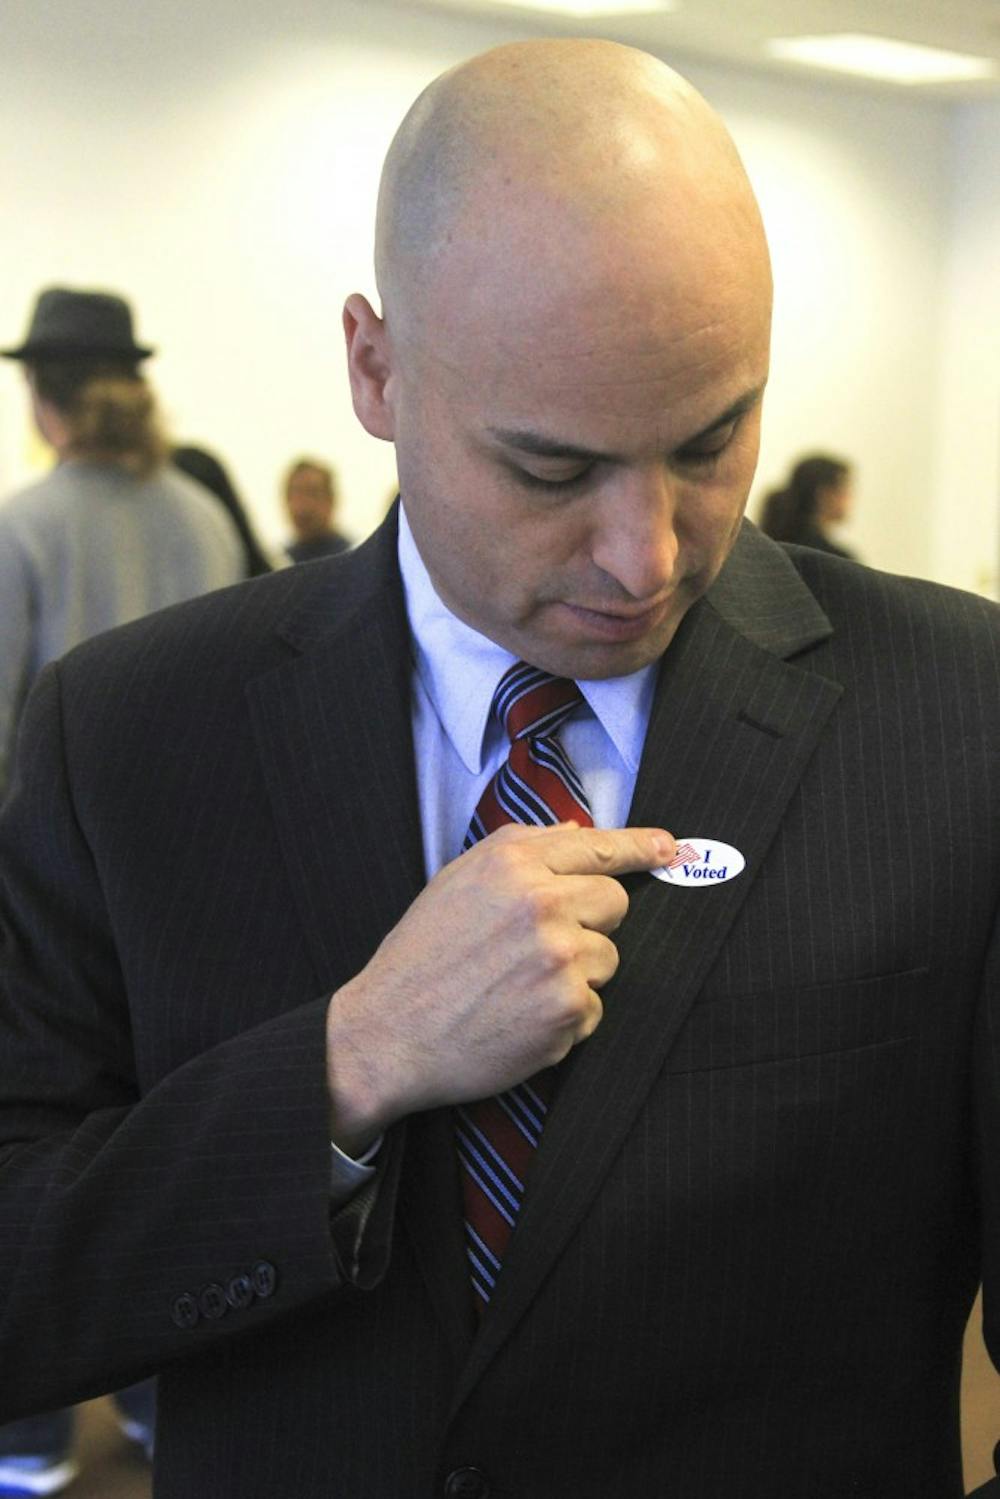 Hector Balderas, the Democratic candidate for attorney general, places an “I voted” sticker on his lapel after voting Tuesday morning at the West Bluff polling center. Balderas defeated Republican candidate Susan Riedel for the attorney general’s seat.